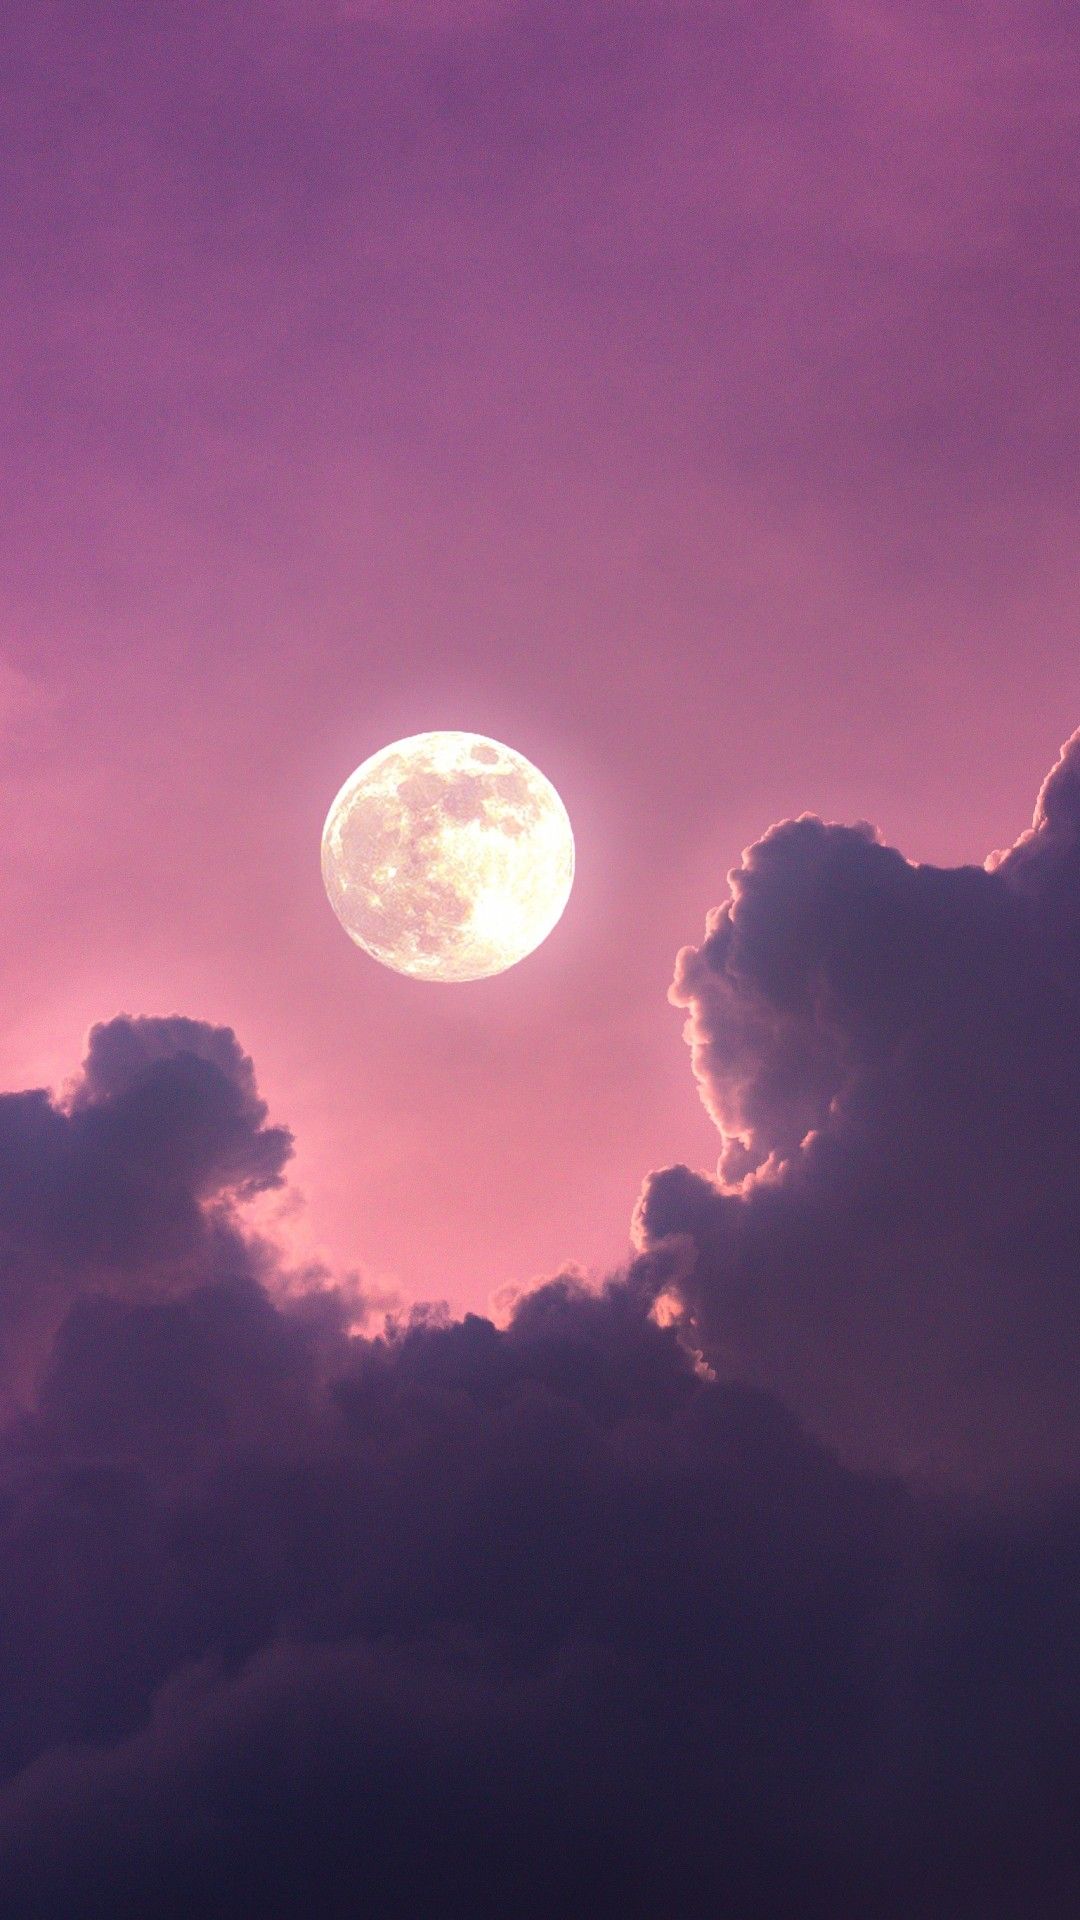 Full moon 4K Wallpaper, Clouds, Pink sky, Scenic, Aesthetic, Nature